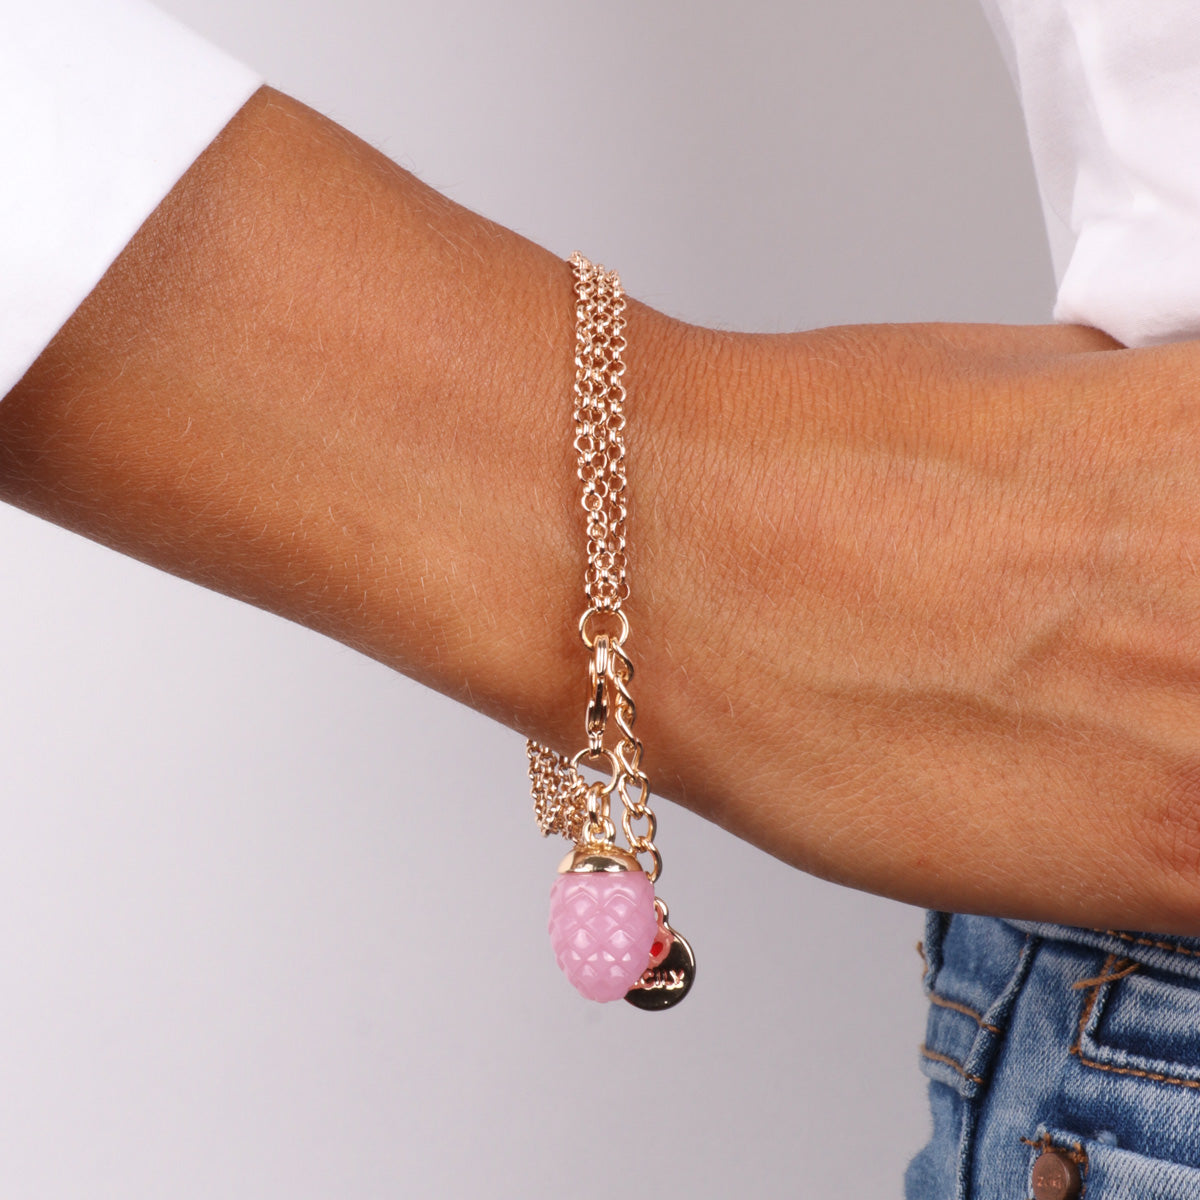 Metal bracelet with pink charming pine -shaped pendant